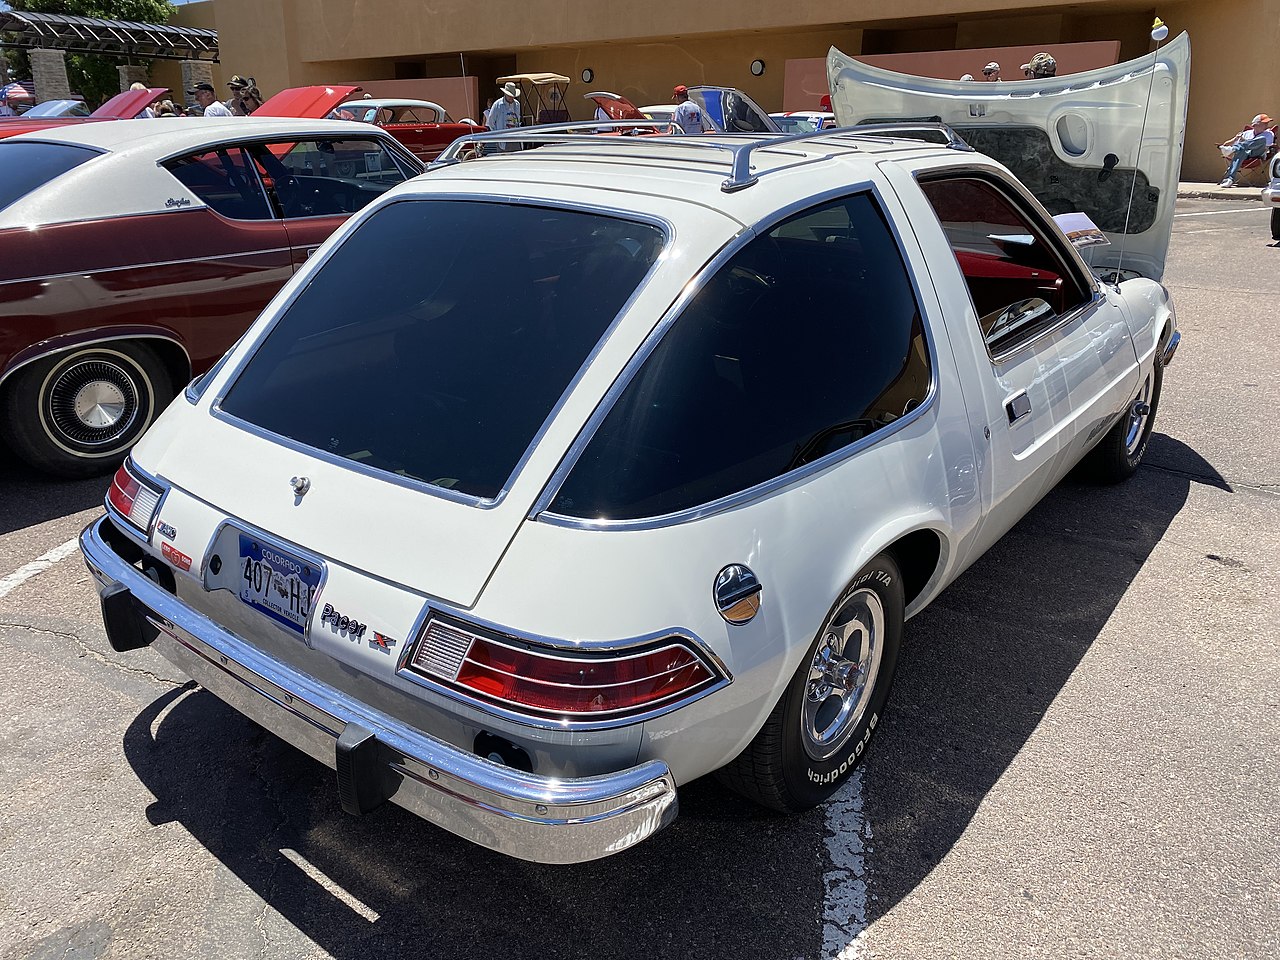 chevy pacer